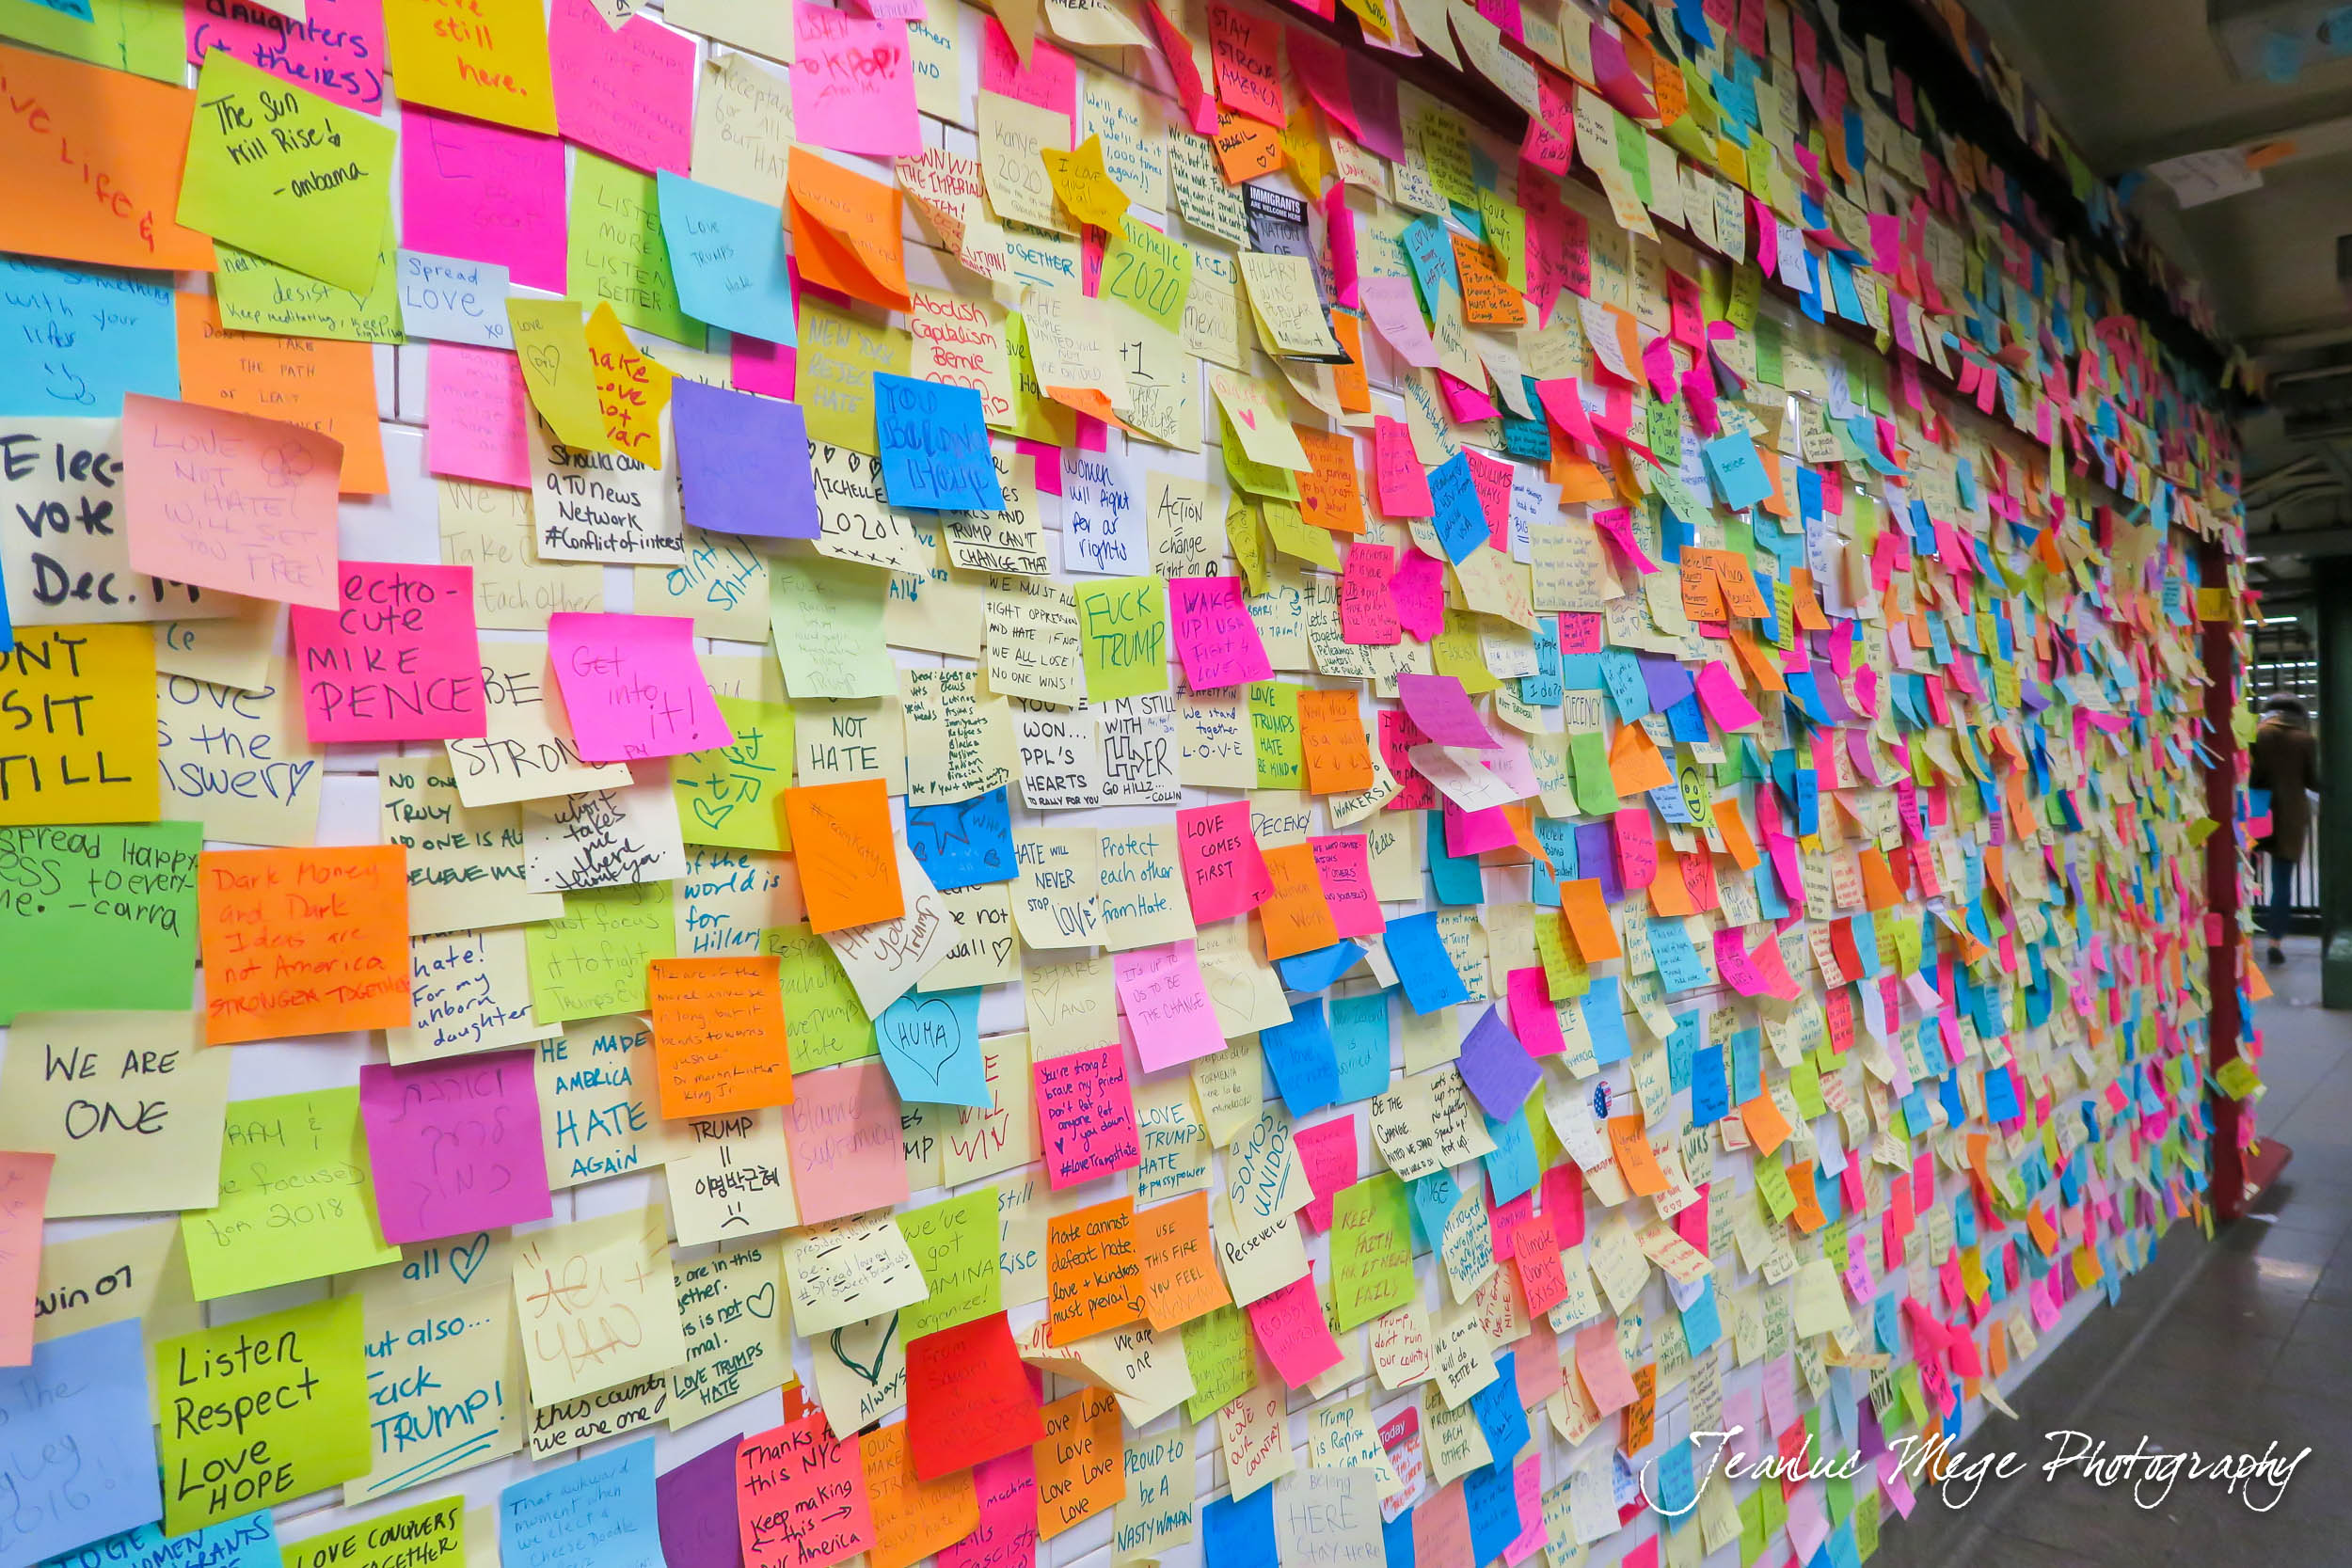 Love Wall Trump Union Square Nyc@jeanlucmege-0114.jpg